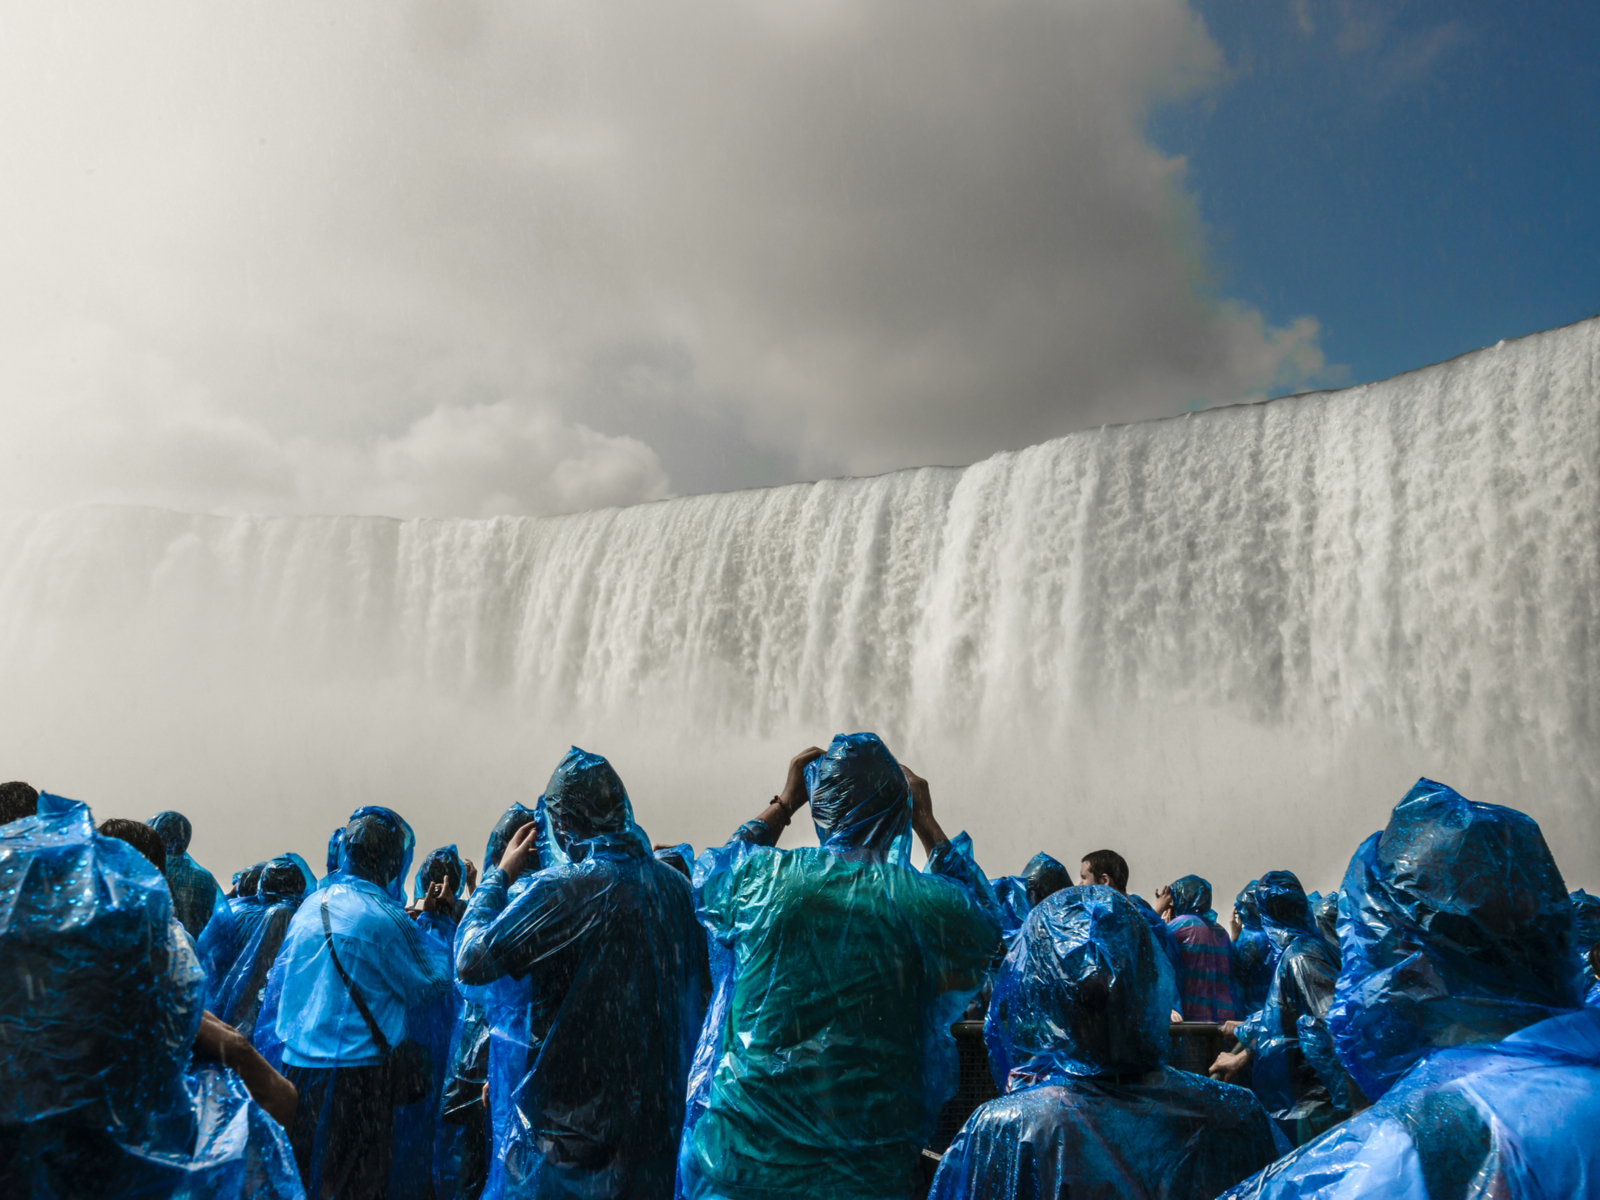 People going under the water in ponchos during the best time to visit Niagara Falls